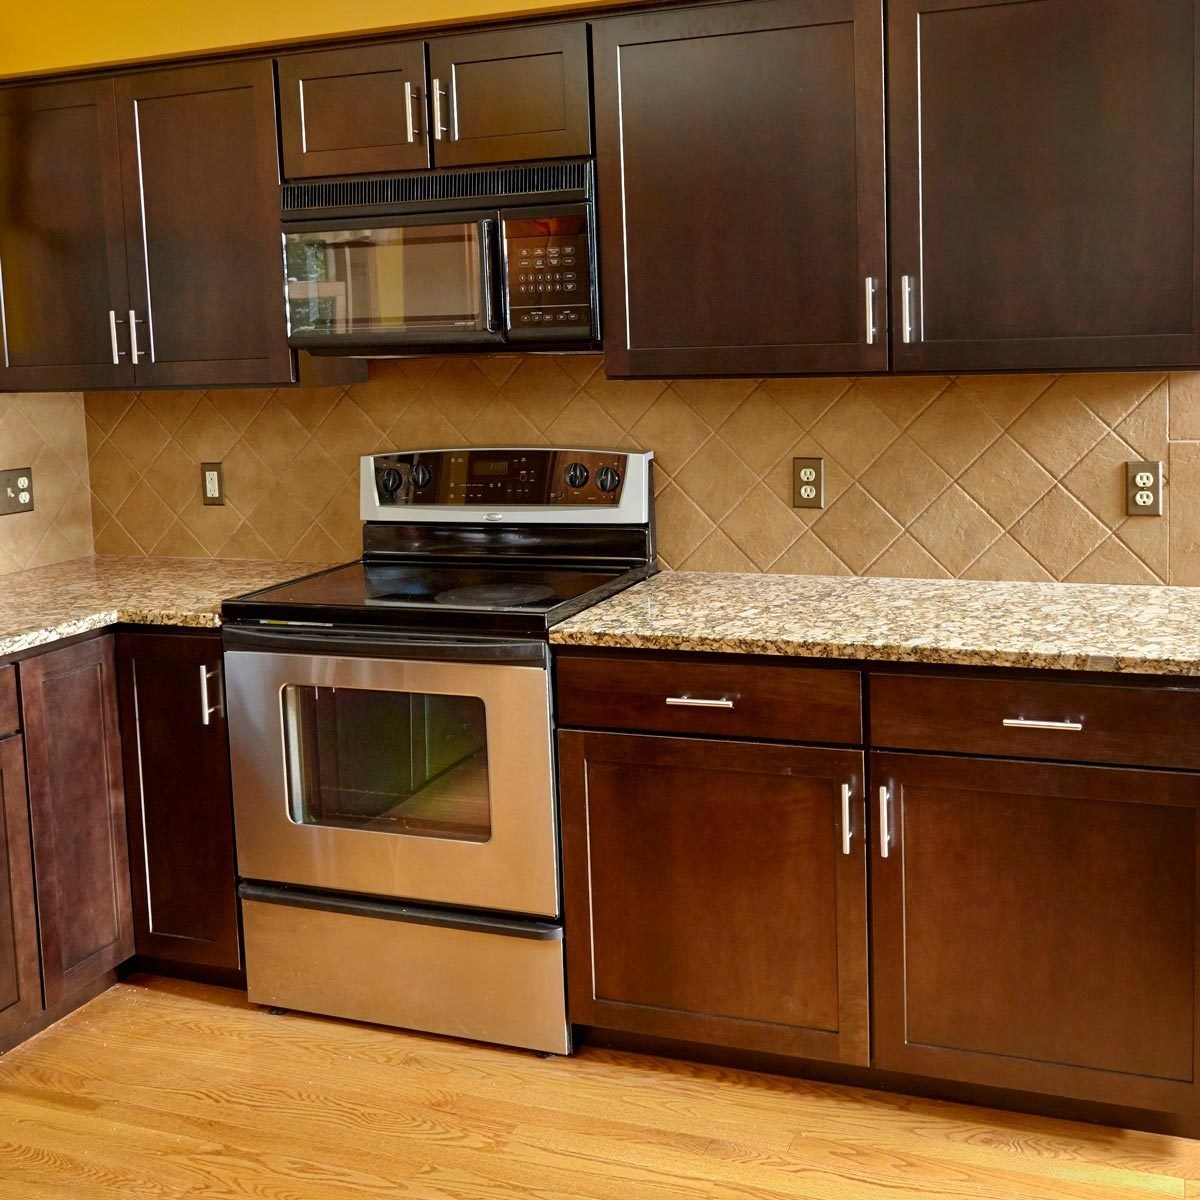 Cabinet Refacing: How to Reface Kitchen Cabinets (DIY)